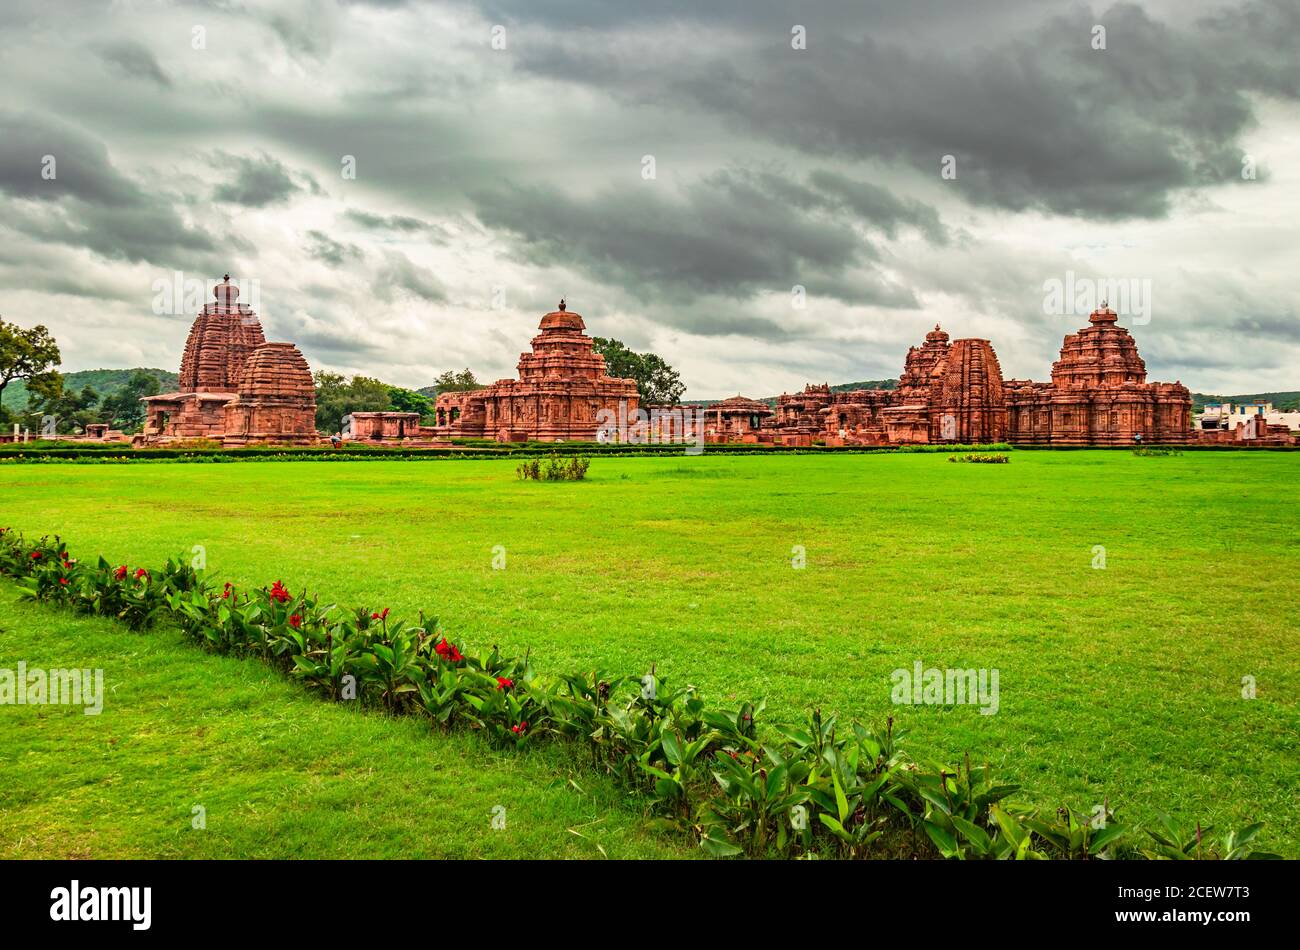 pattadakal temple complex group of monuments breathtaking stone art with dramatic sky karnataka india. It's one of the UNESCO World Heritage Sites and Stock Photo